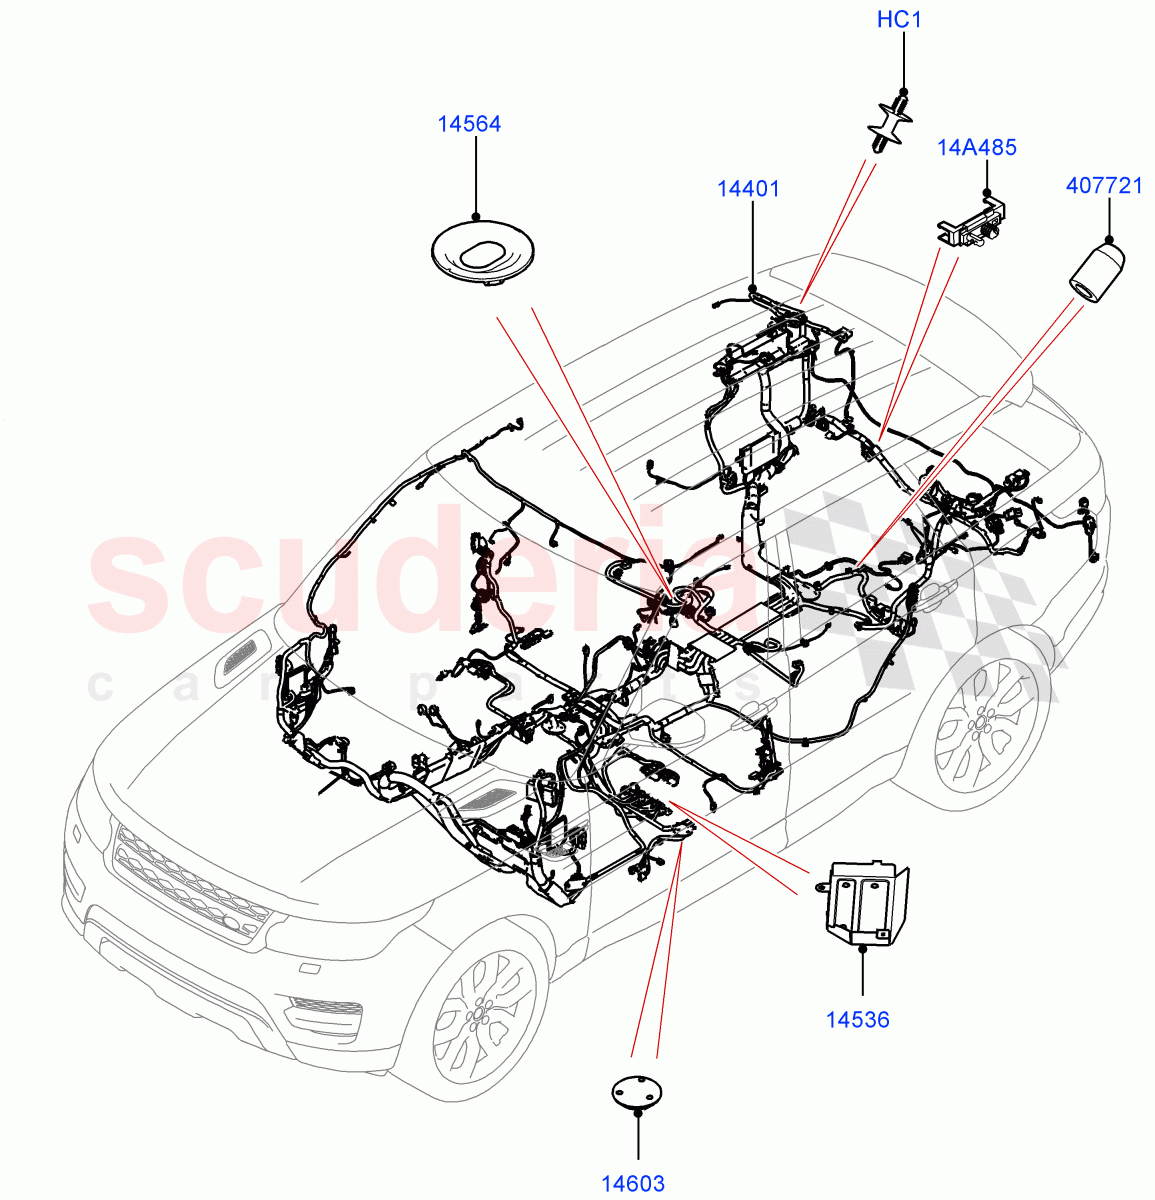 Electrical Wiring - Engine And Dash(Main Harness)((V)TOEA999999) of Land Rover Land Rover Range Rover Sport (2014+) [3.0 DOHC GDI SC V6 Petrol]